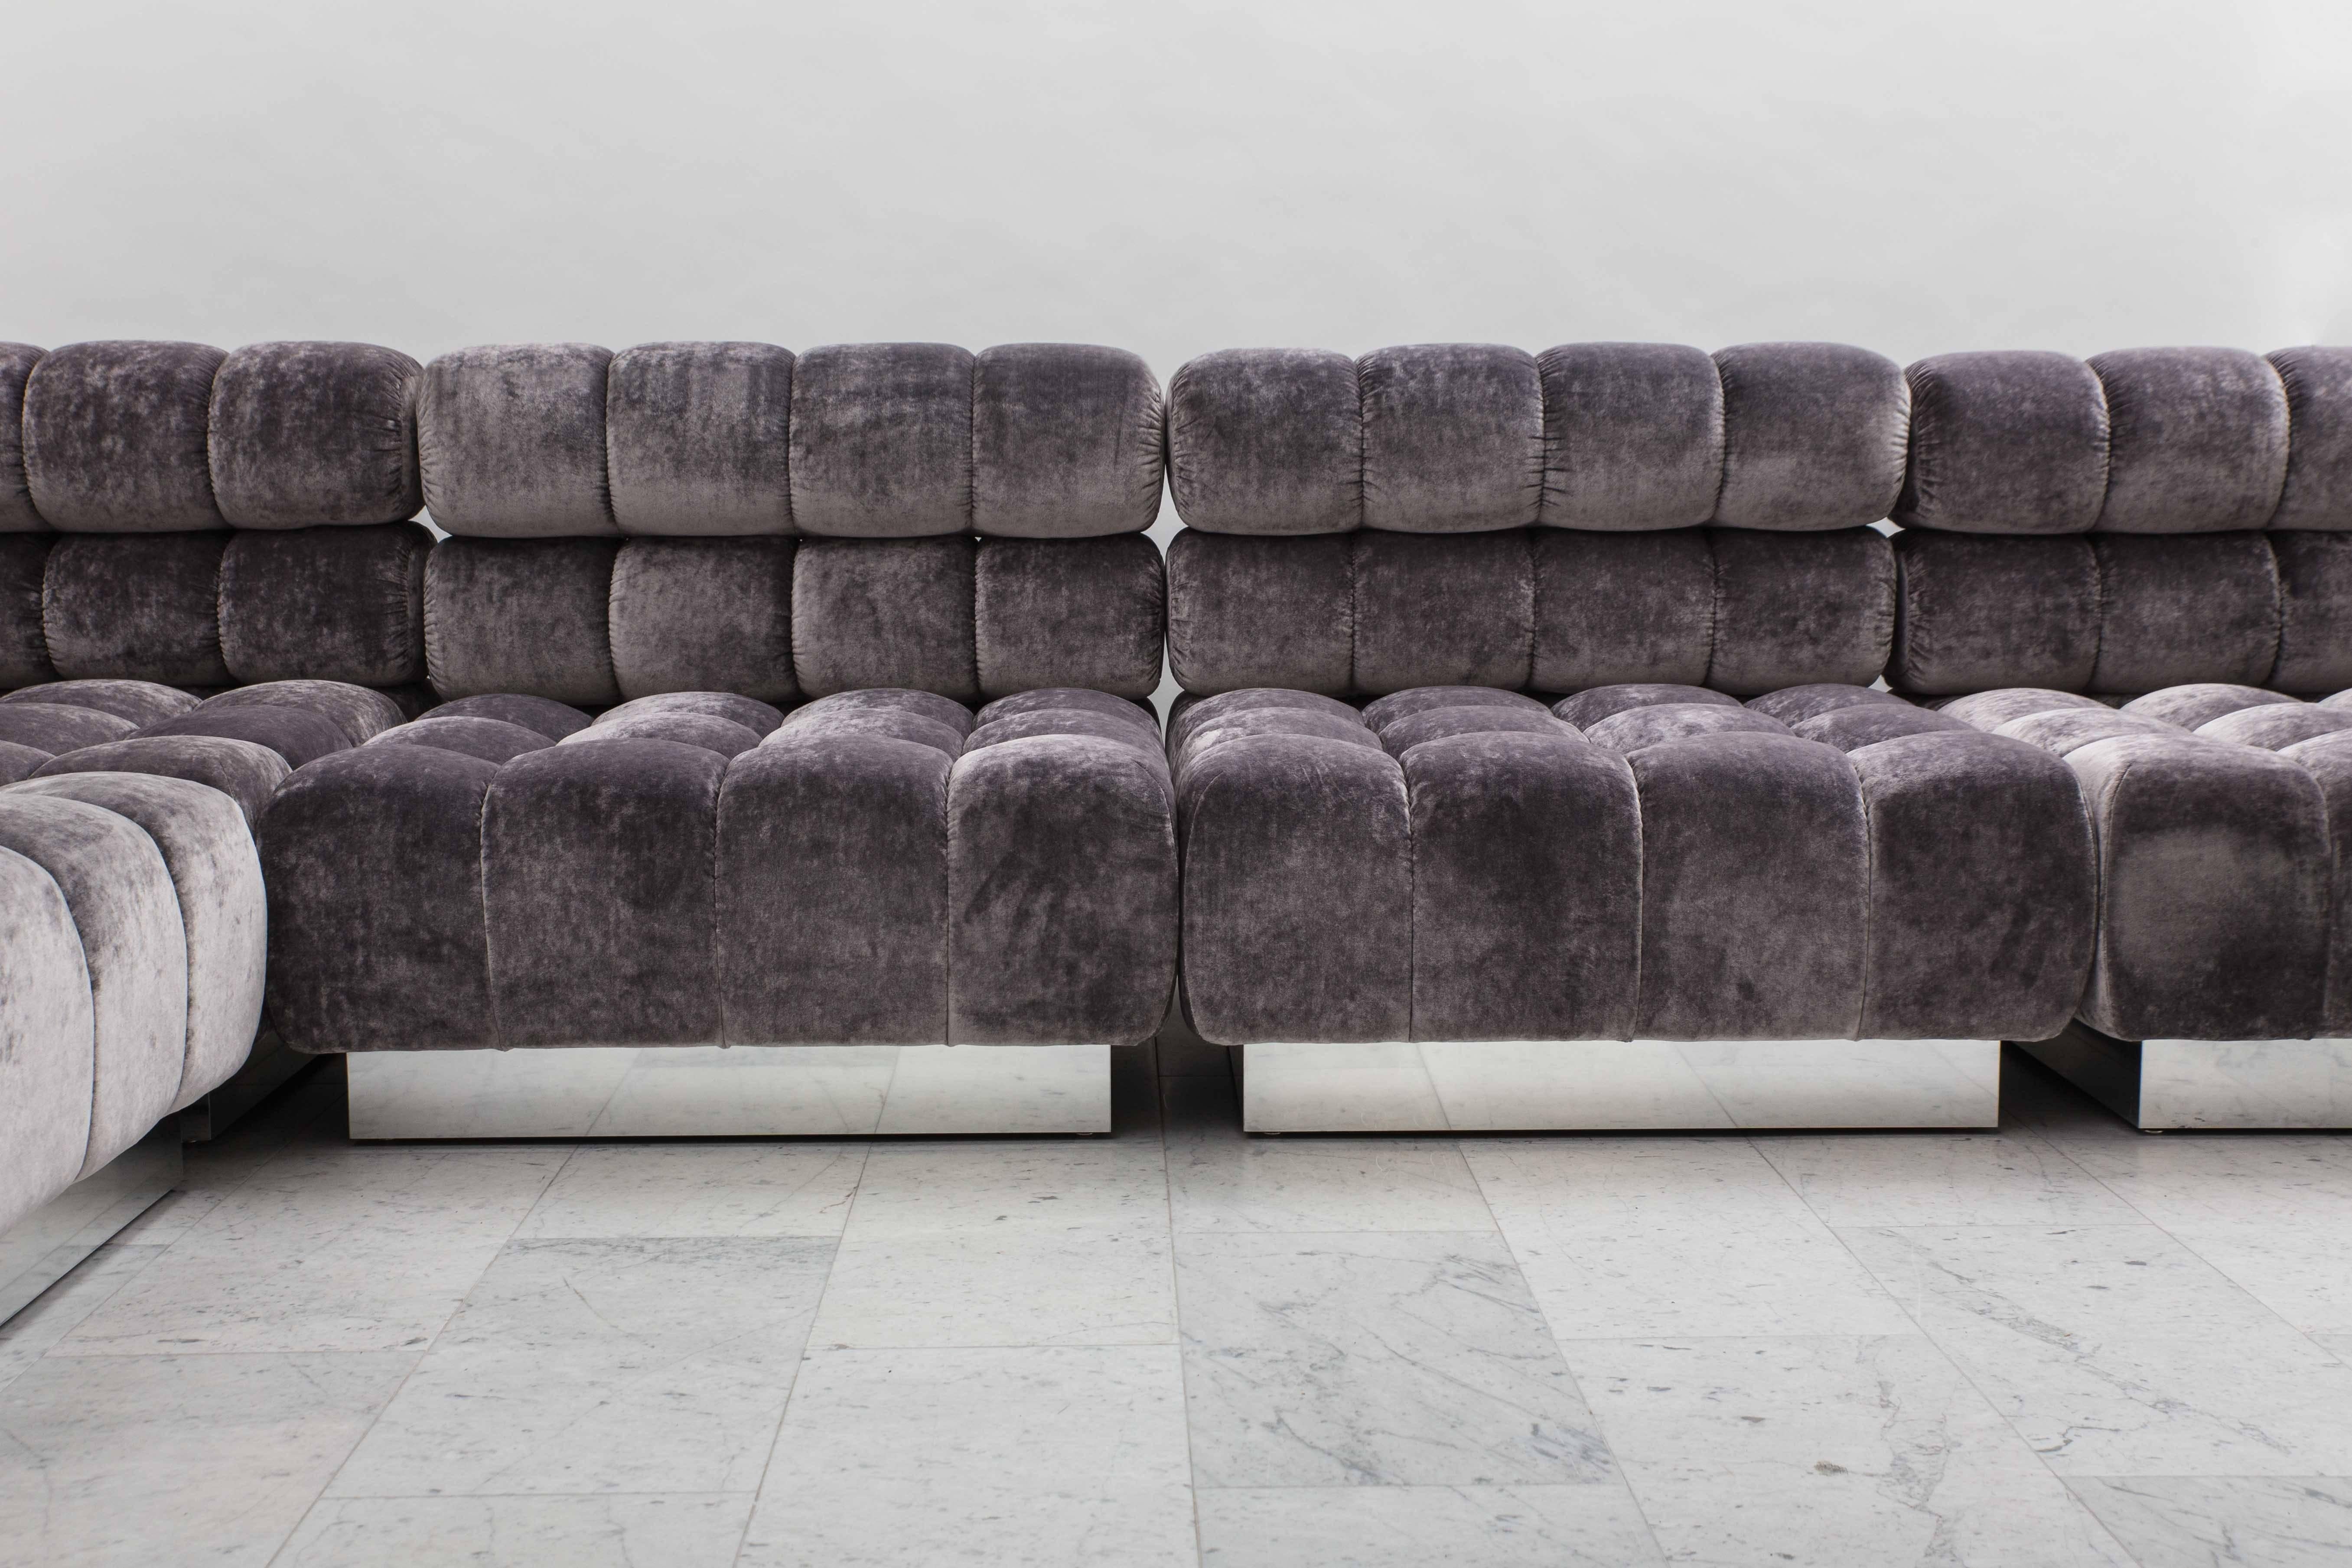 The Todd Merrill custom originals tufted sectional is an elegant, comfortable and versatile seating group available on a commission order basis. The double is the tallest style available, featuring a unique double tufted layered back.

Each square